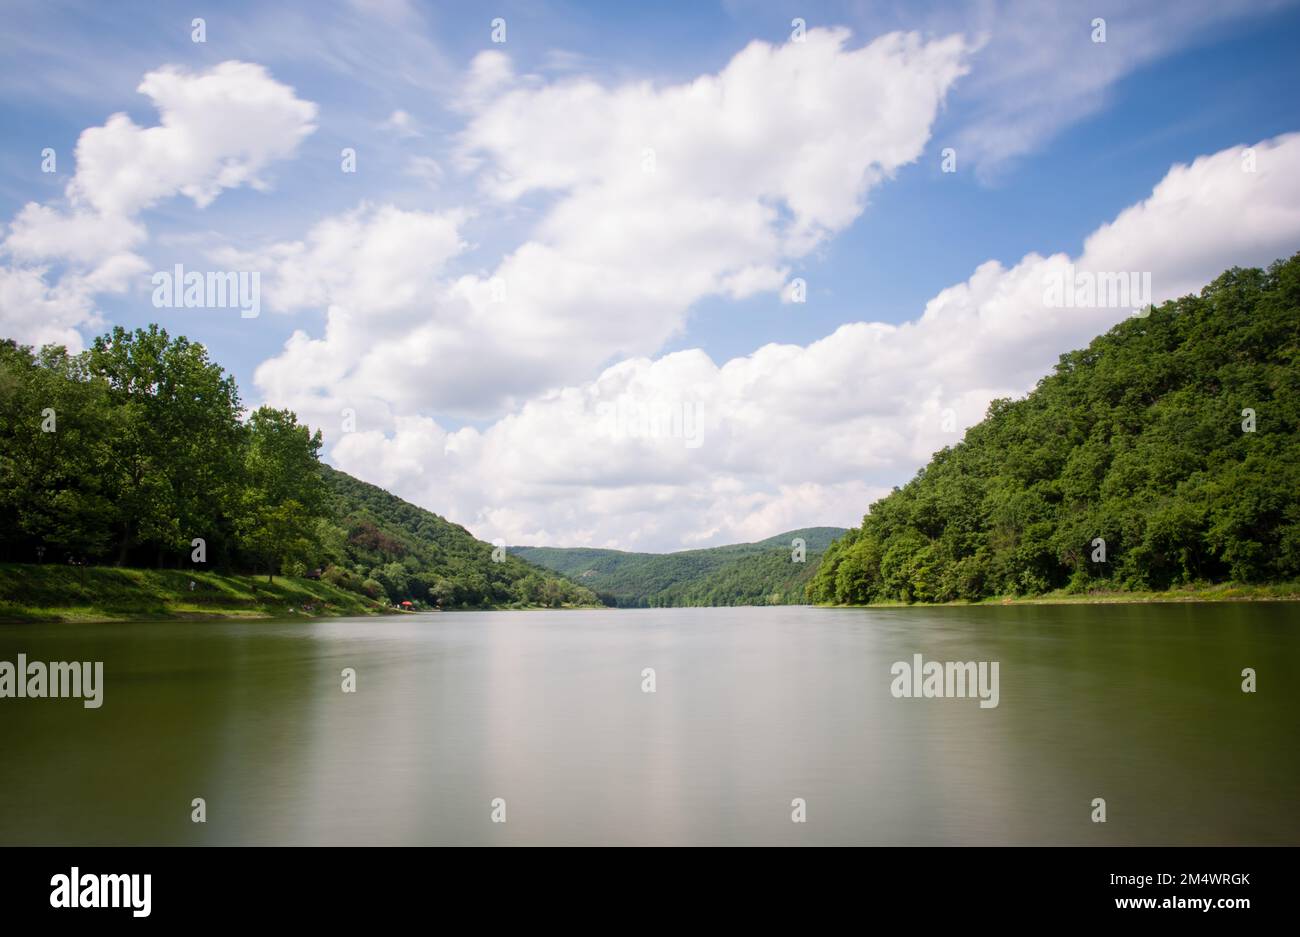 Lázbérci lake in Hungary and the Bükk Mountains in the background Stock Photo